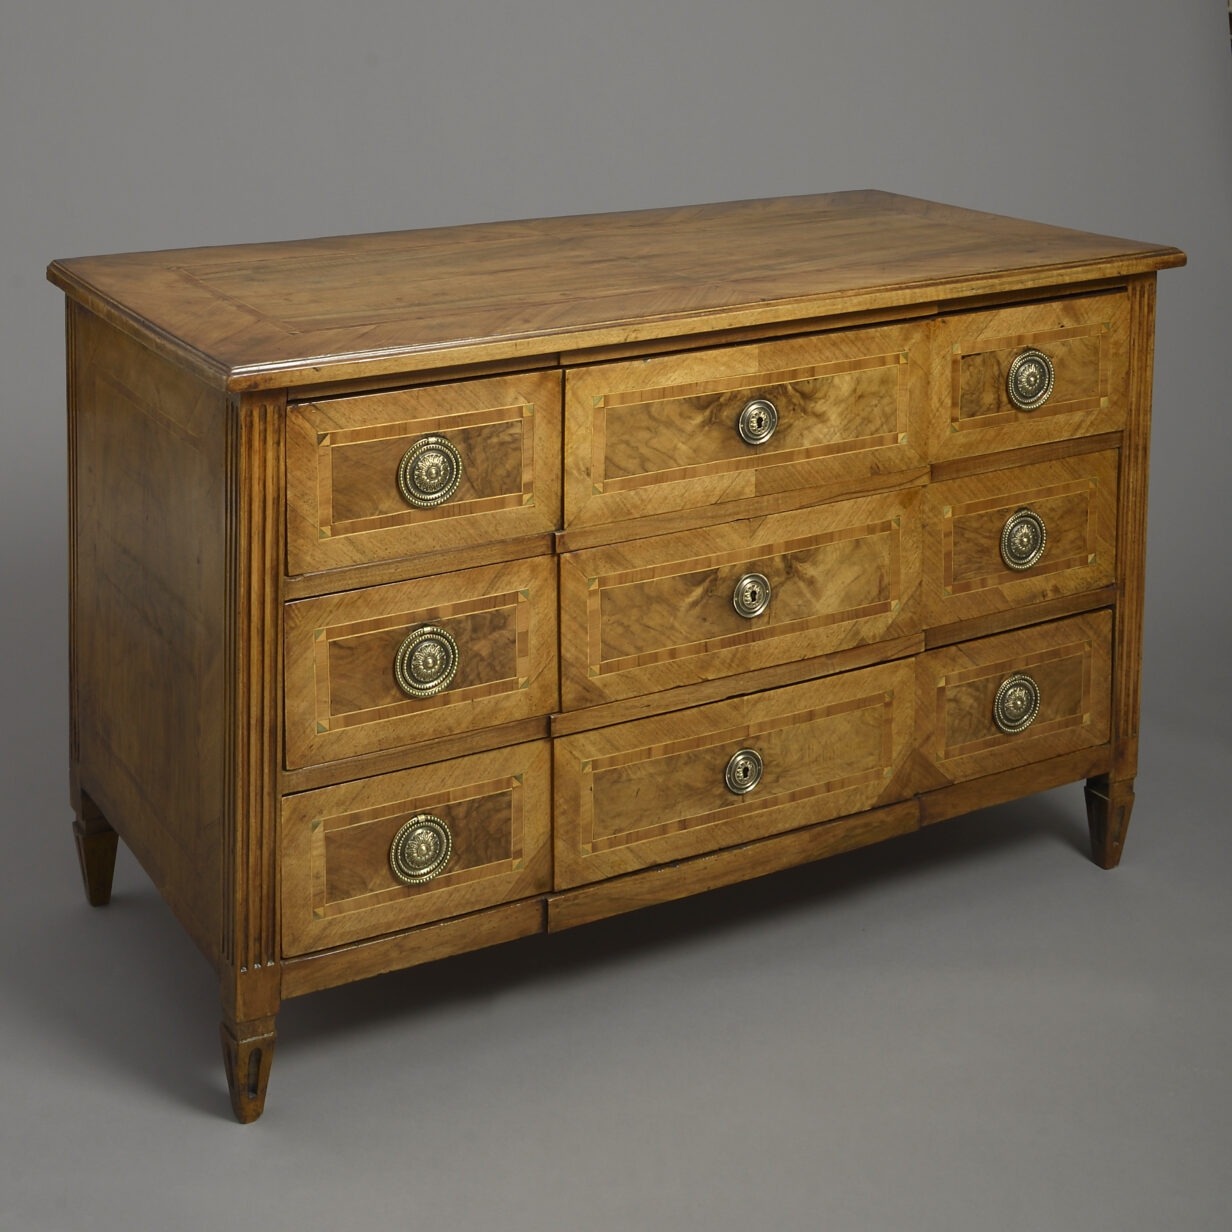 Late 18th century neoclassical walnut commode